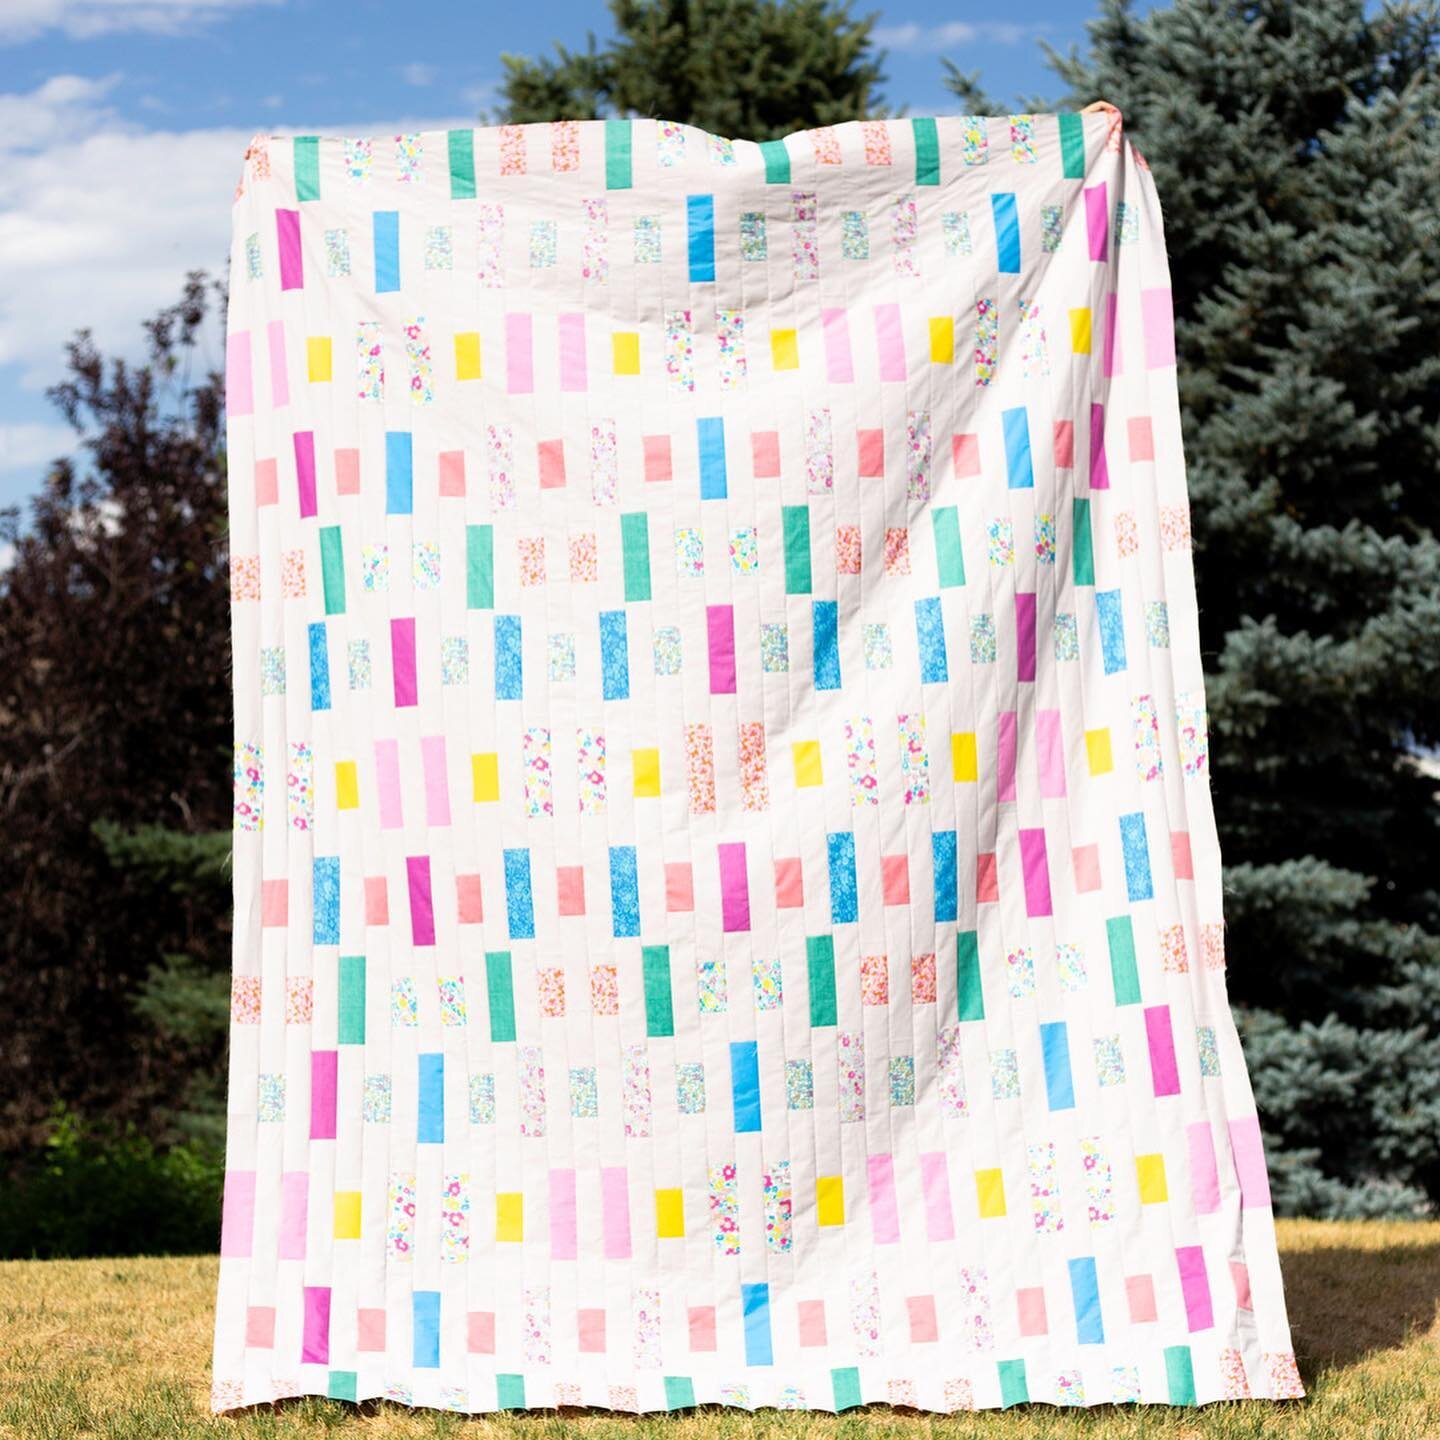 Last up in the tester parade of #WovenLinesQuilt s is the twin size! These three amazing ladies took extra time out of their lives to make these big beautiful quilts and I am so thankful! They all turned out perfectly!
.
1-2: Ashlee of @kinandcotton
